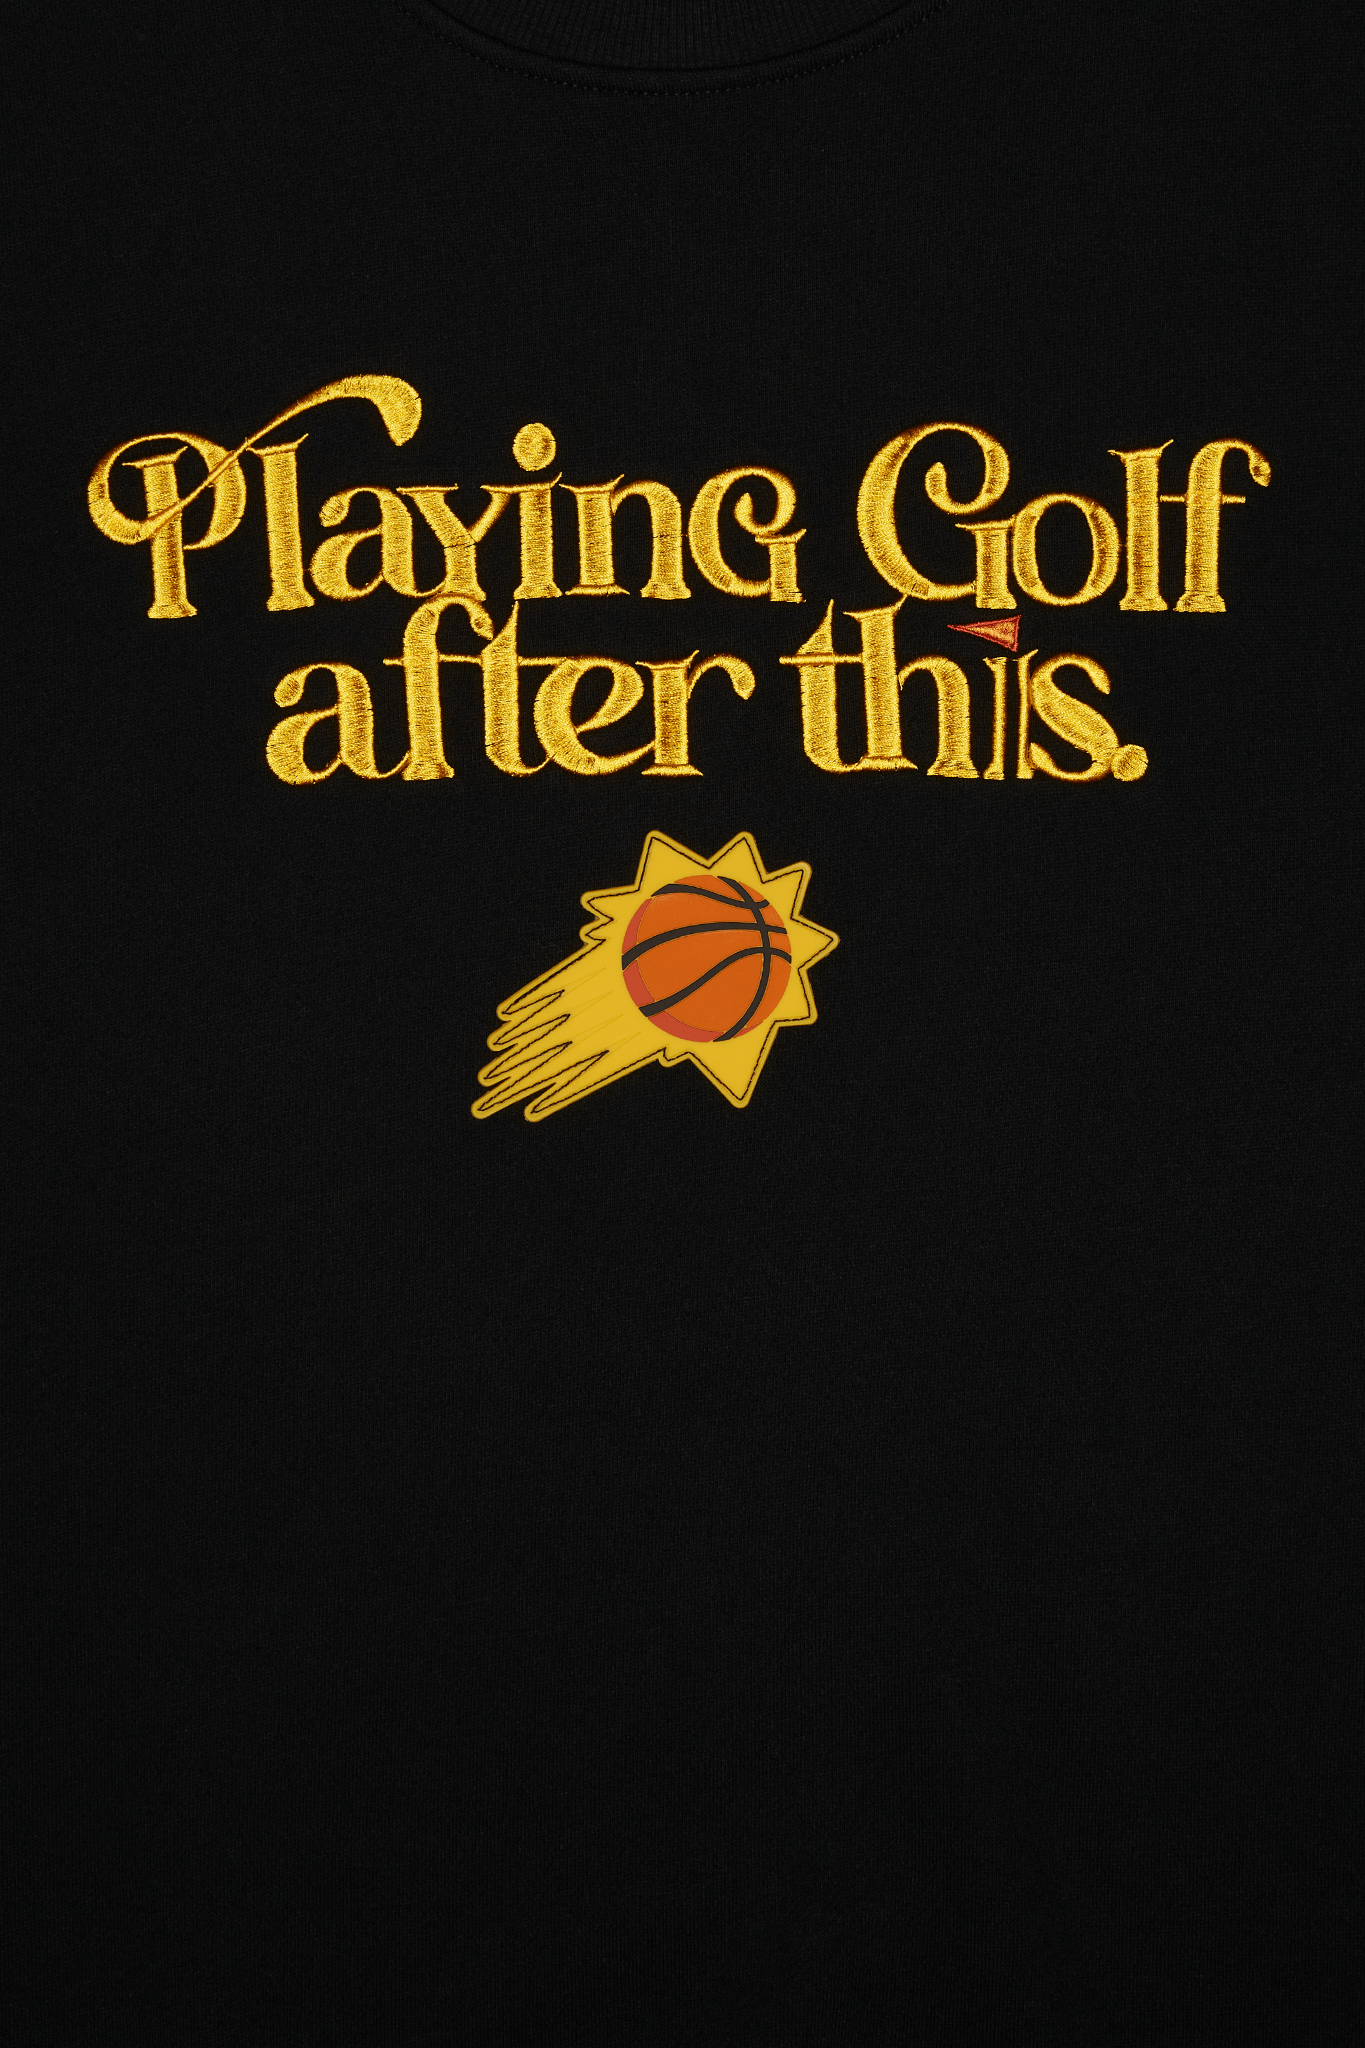 Eastside NBA- Playing Golf After This Suns Hoodie Black